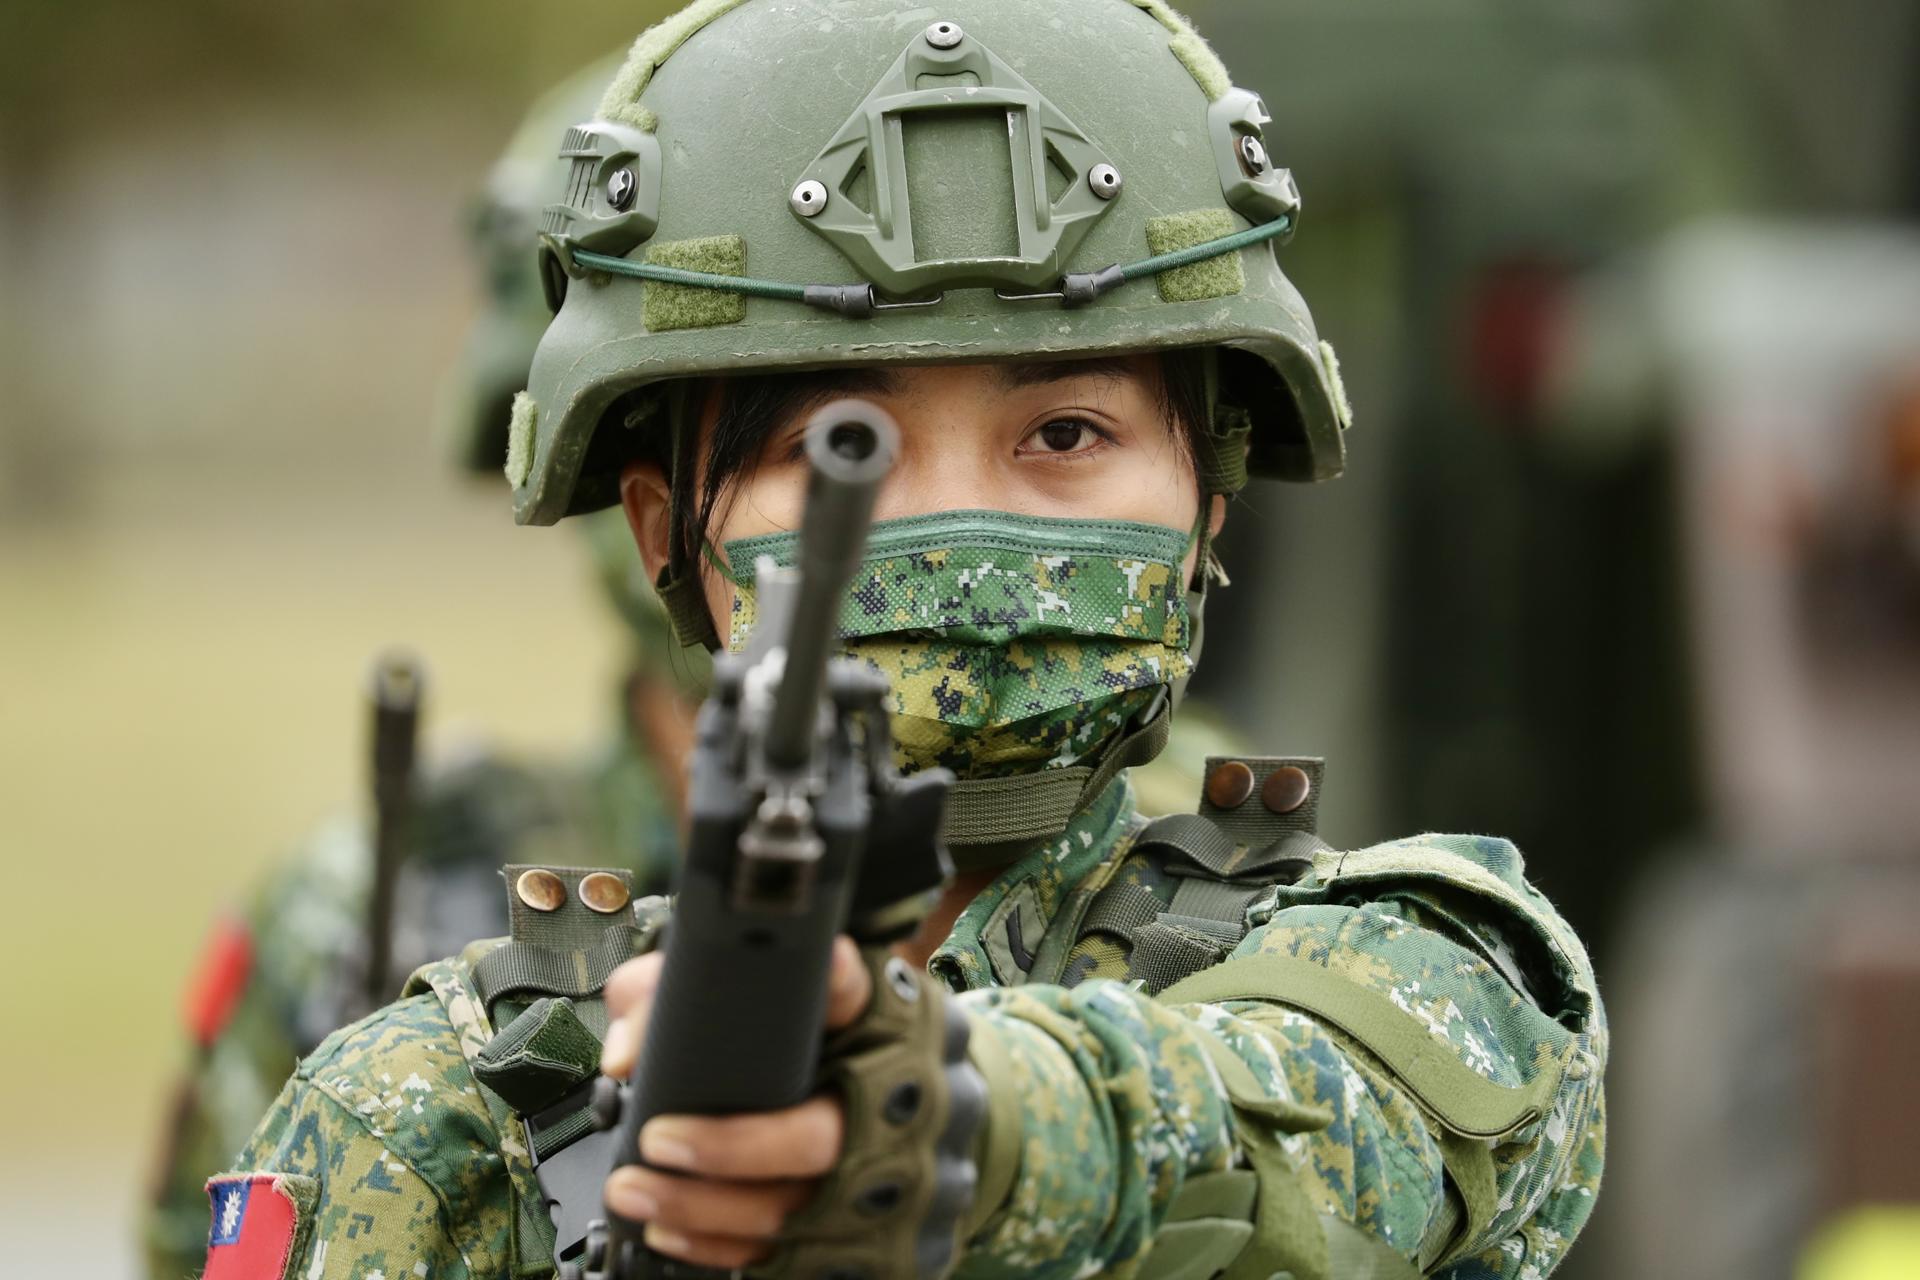 A Taiwanese military soldier holds a riffle during the visit of Taiwan President Tsai Ing-wen (not pictured) at a military base in Taitung, Taiwan, 21 January 2022. EFE-EPA/RITCHIE B. TONGO